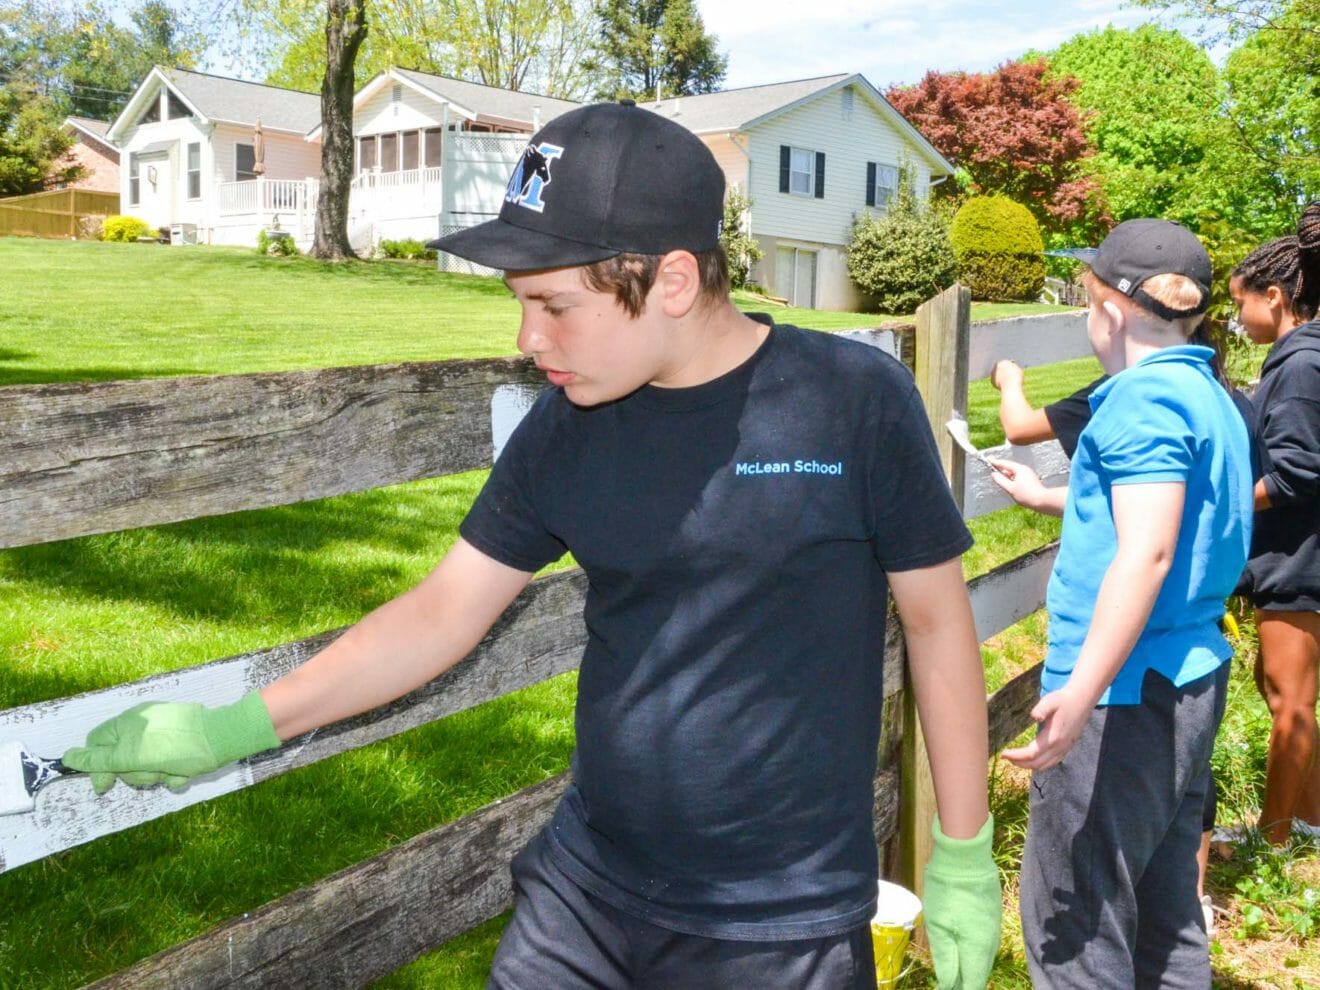 Middle school students paint fence for community service